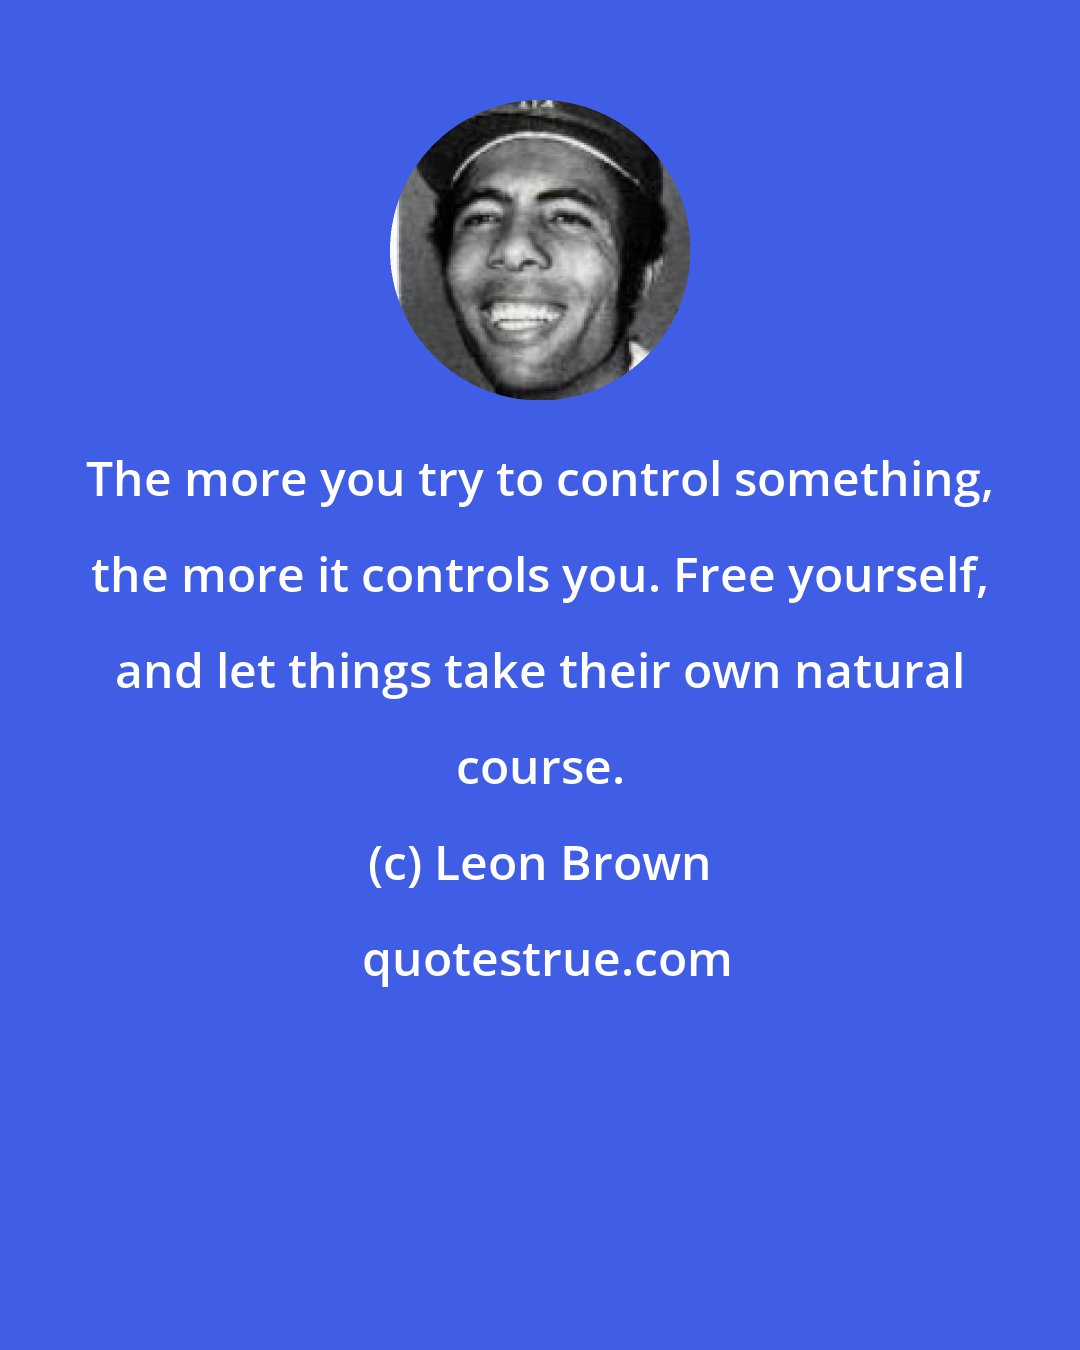 Leon Brown: The more you try to control something, the more it controls you. Free yourself, and let things take their own natural course.